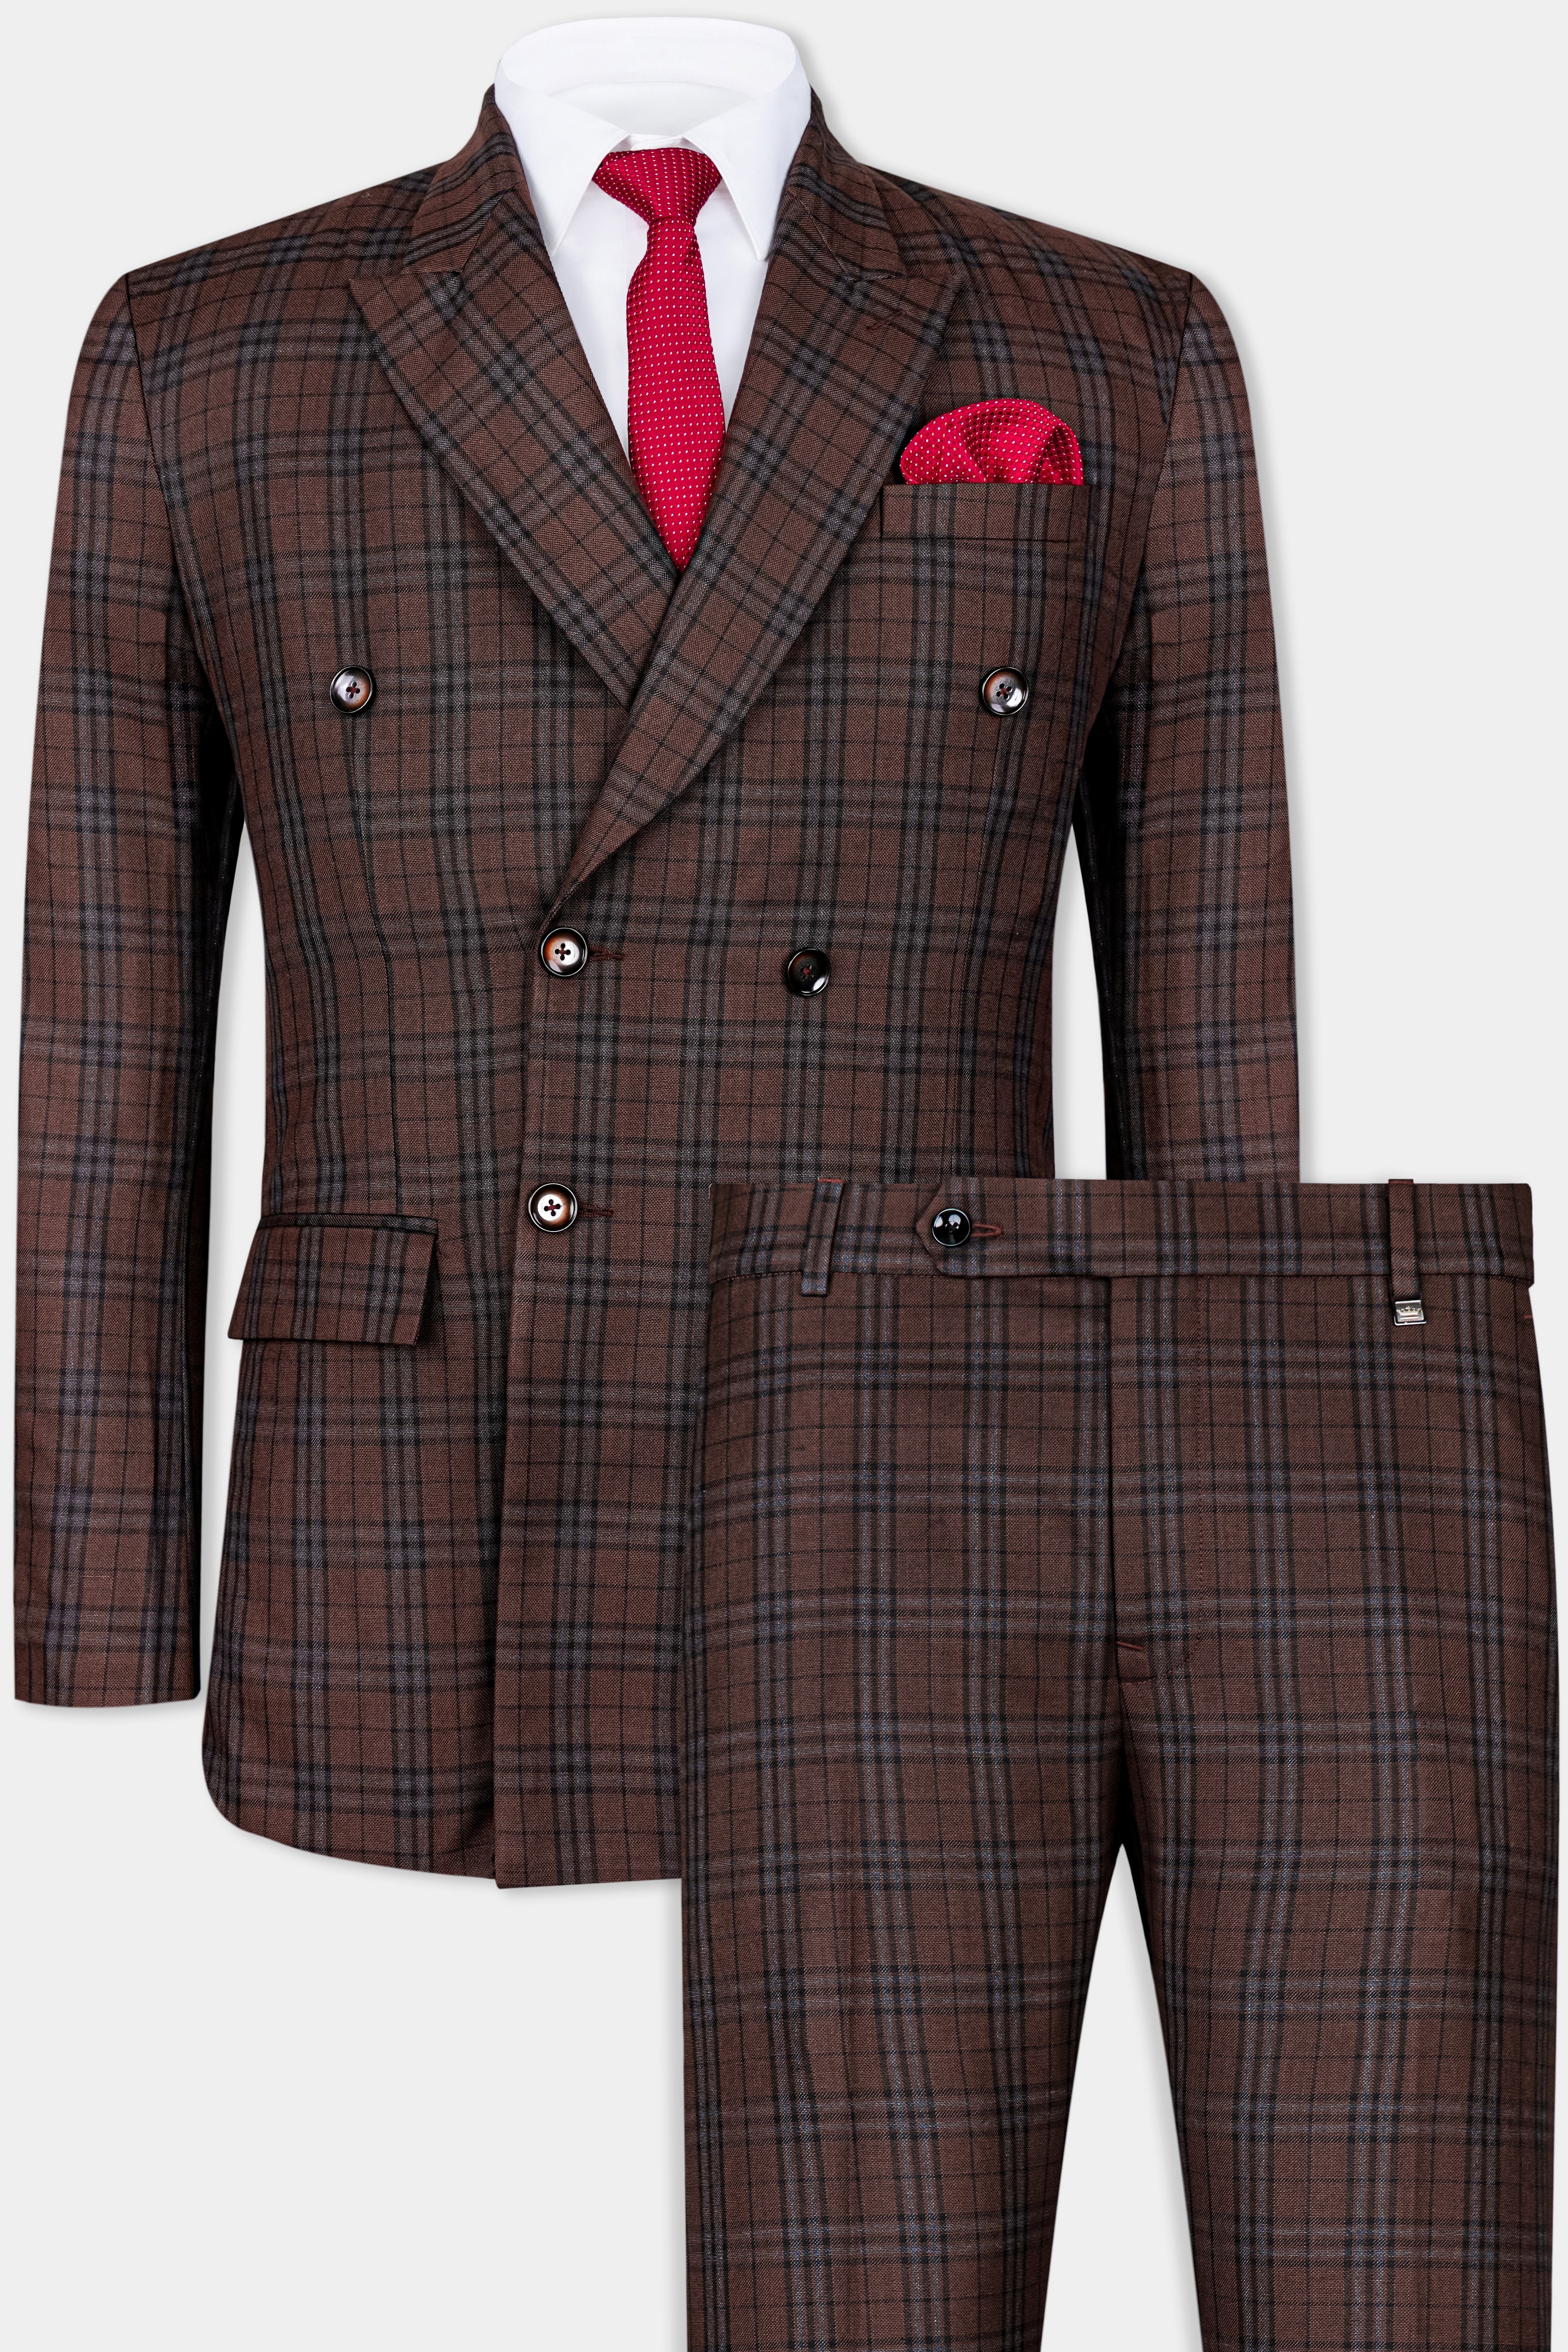 Gingerbread Plaid Wool blend Double-Brested Suit